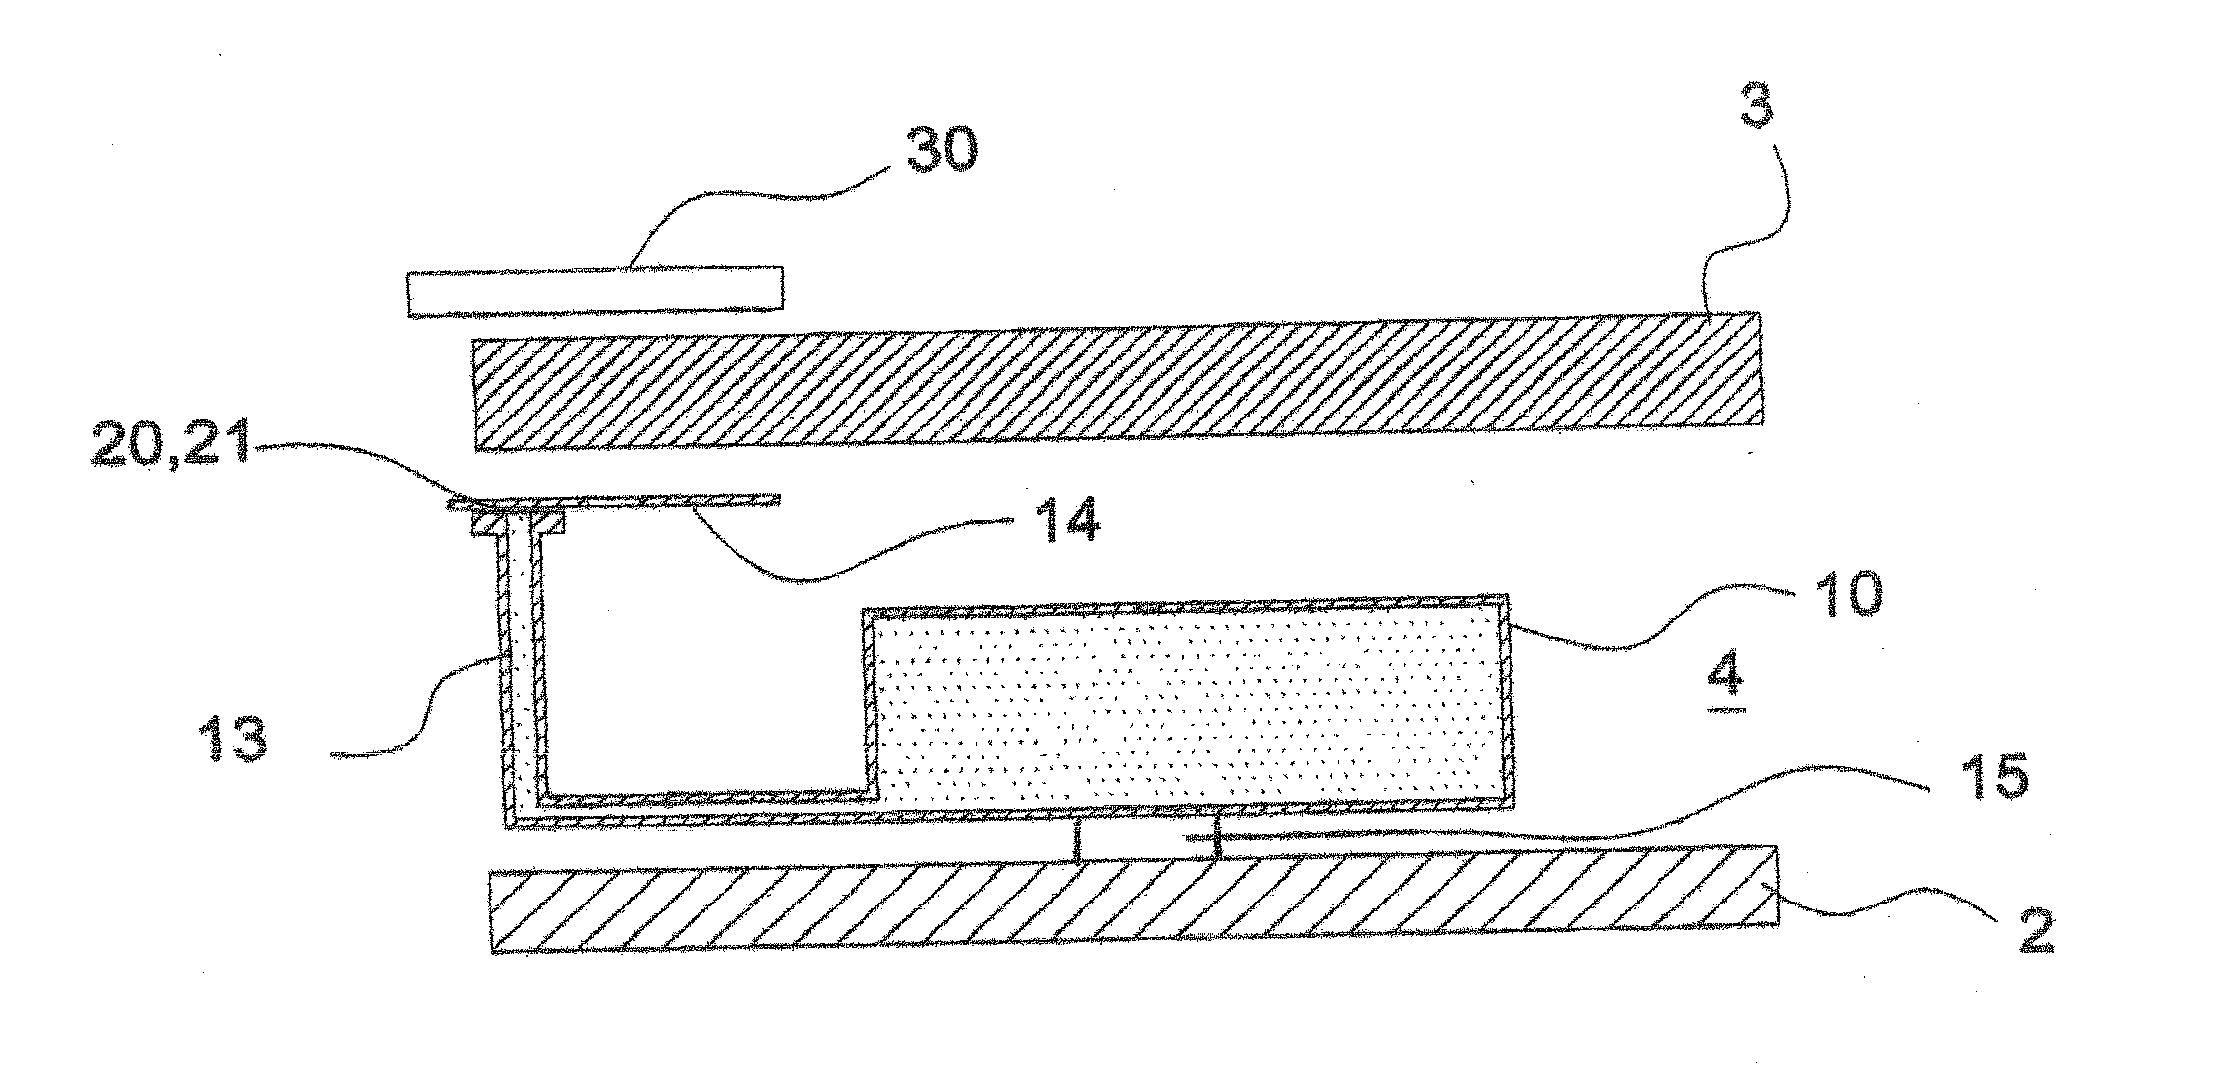 Tubular radiation absorbing device for a solar power plant with improved efficiency